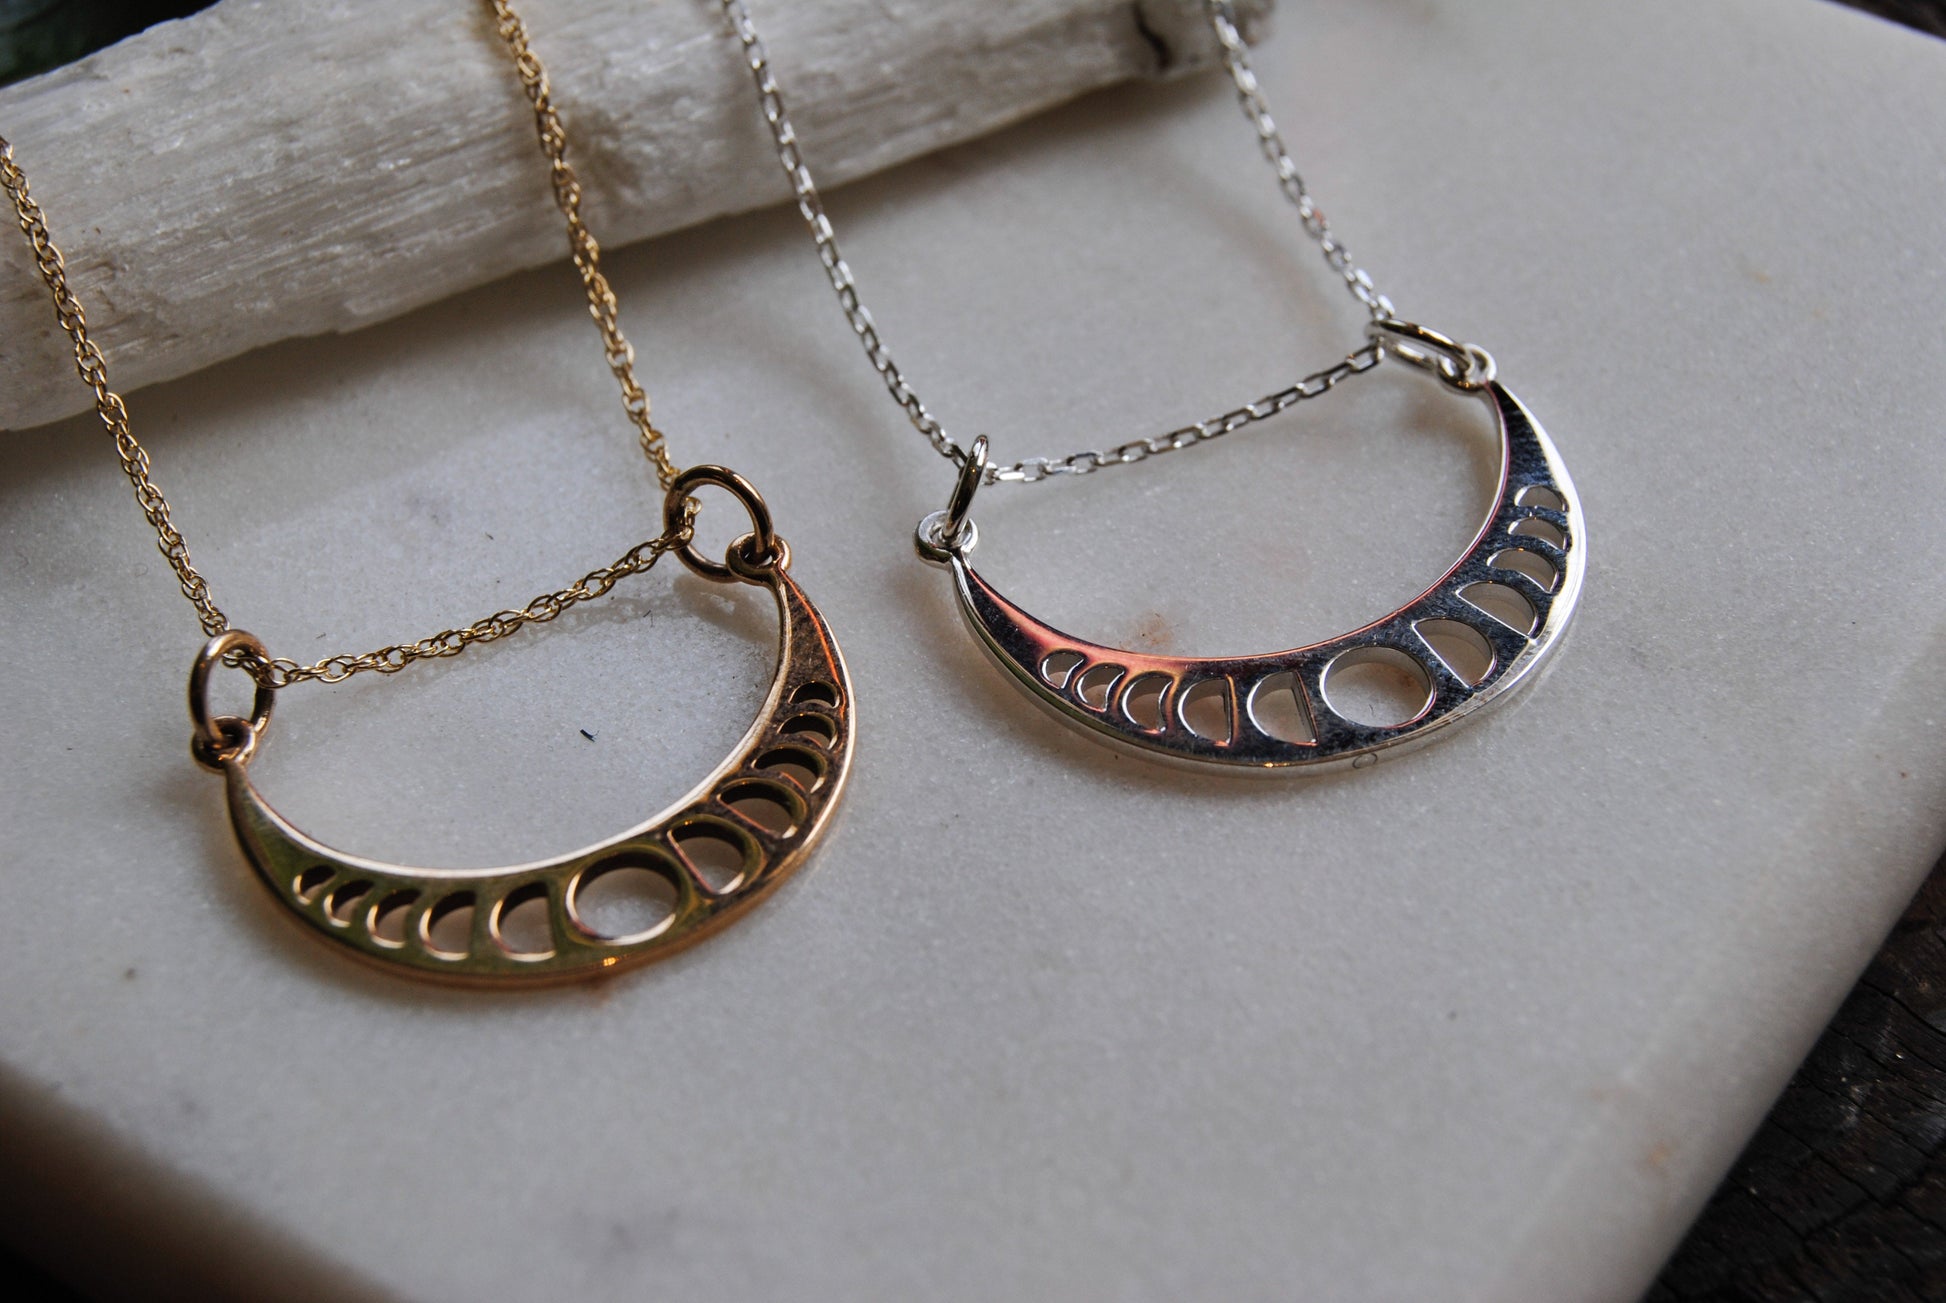 Moon phases crescent necklace